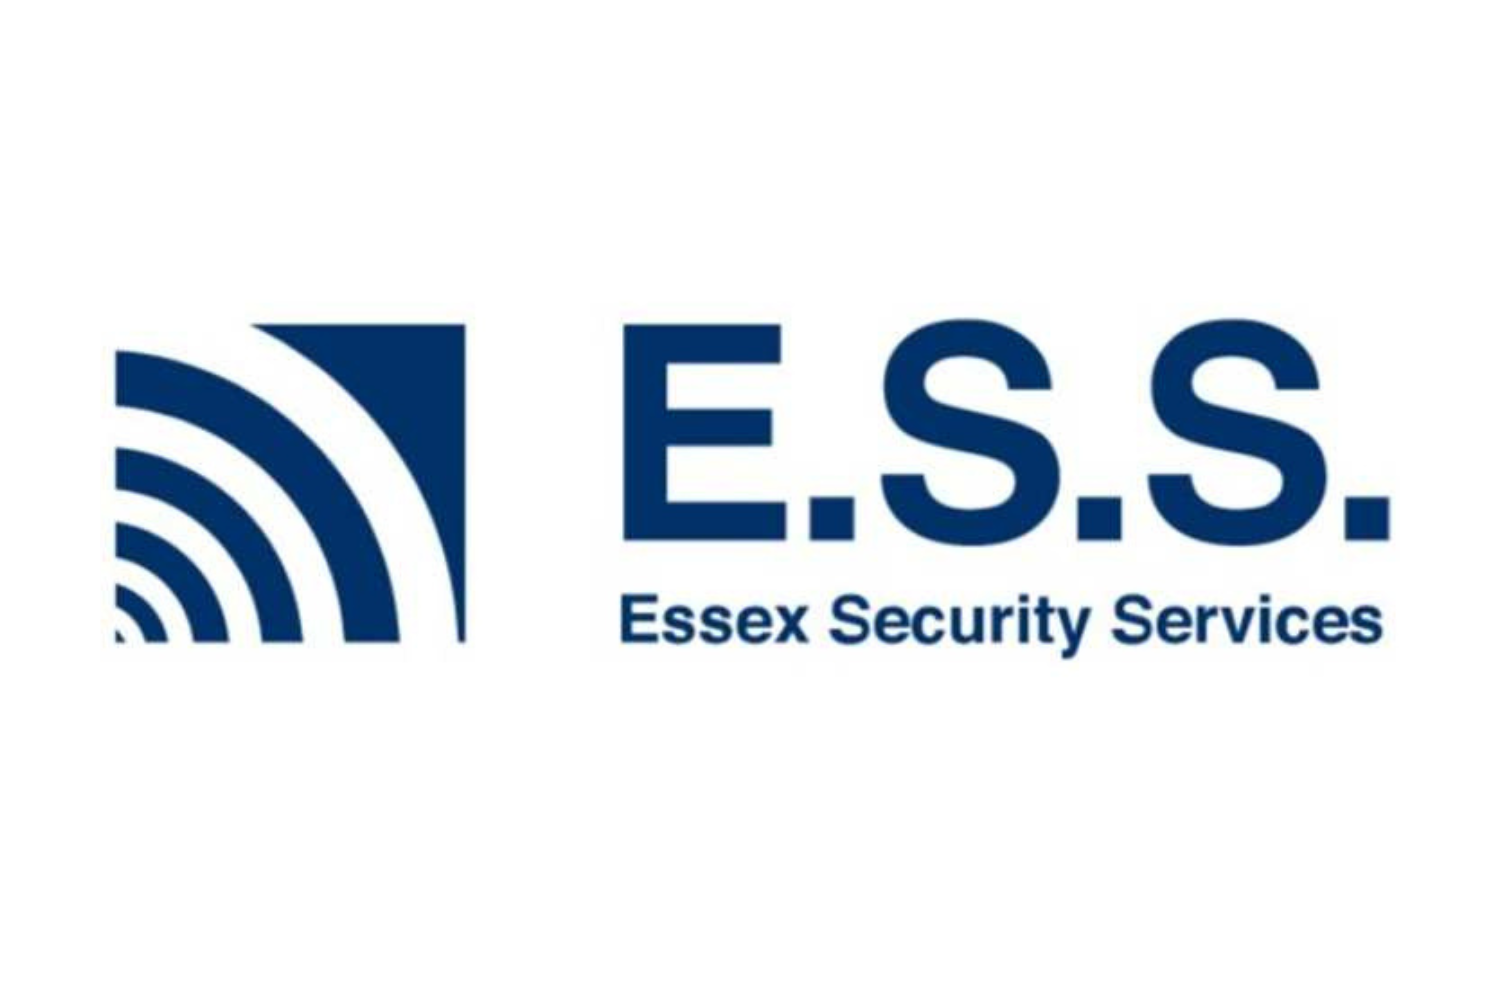 Essex Security Services Limited 